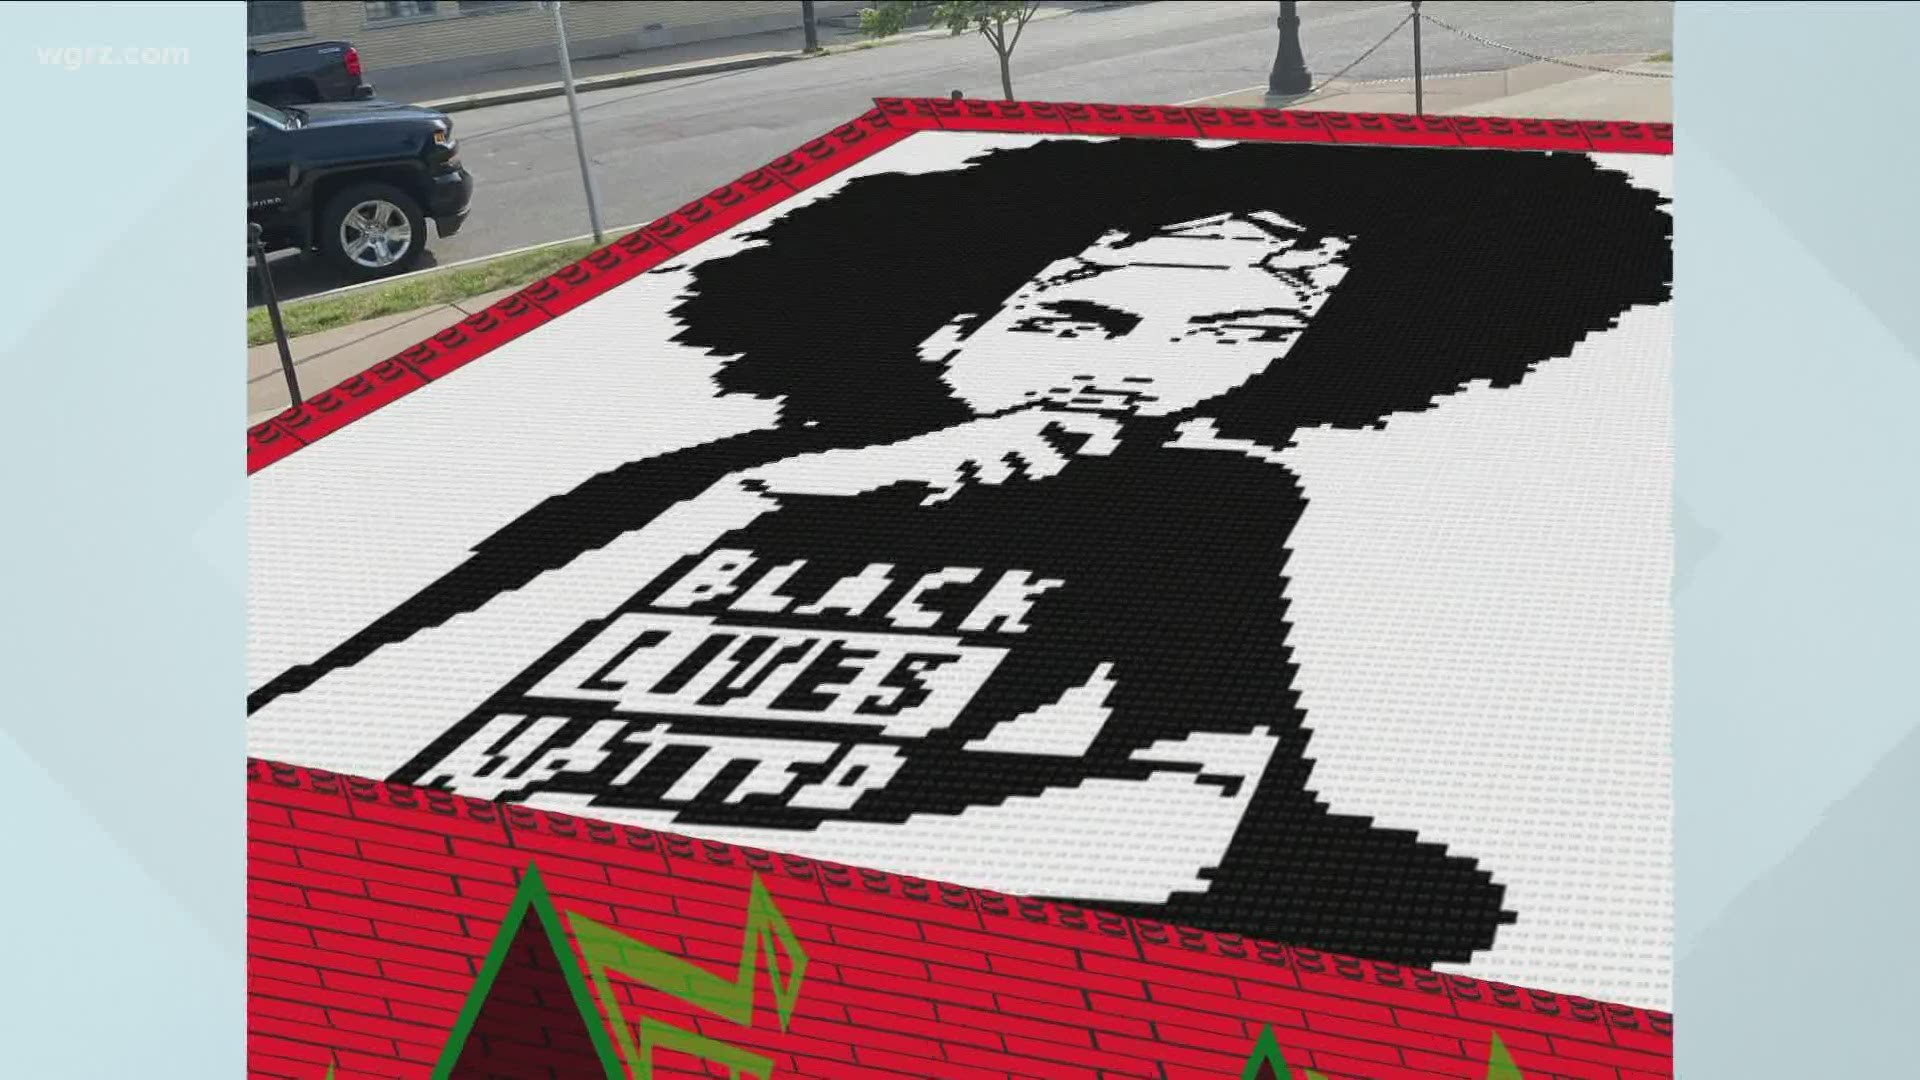 Artist Bianca McGraw is creating a life-size image of a Black Lives Matter Protester